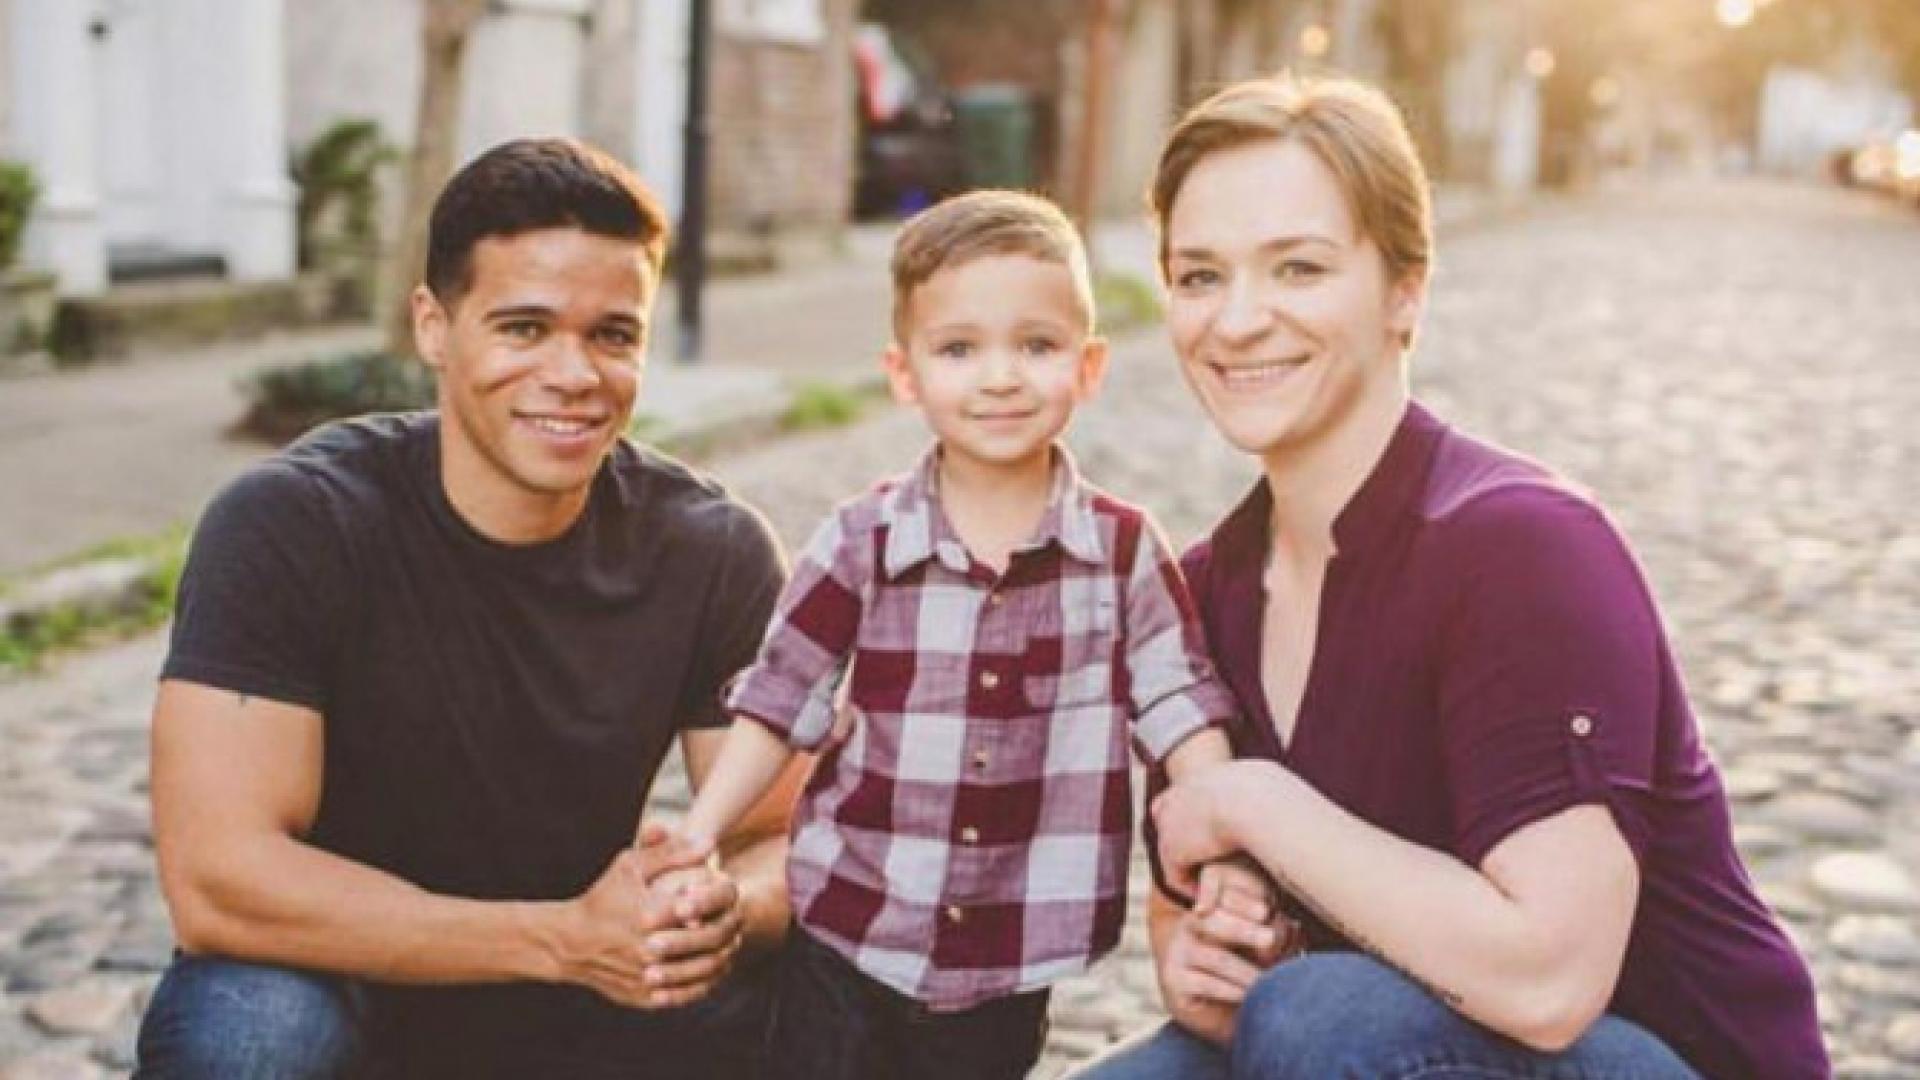 Mom And Dad Still Take Family Photo With Their Son After Divorce: 'It Is Possible To Co Parent'